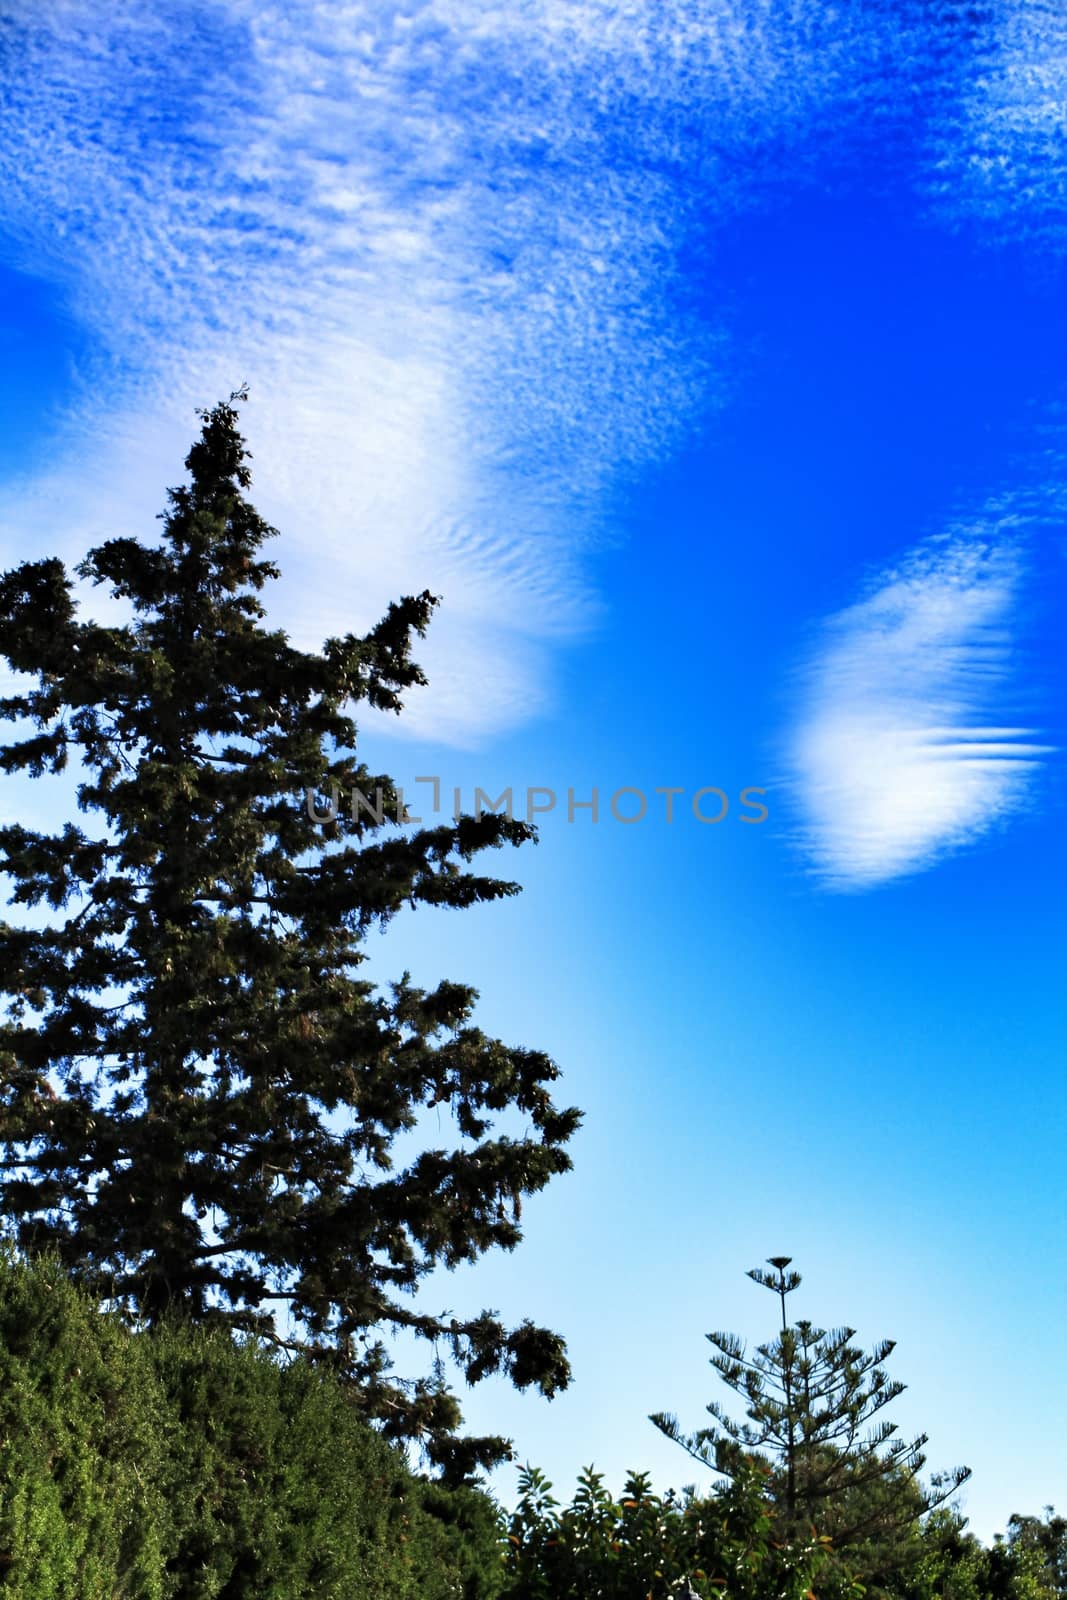 Pine under sky with autocumulus clouds in Spain